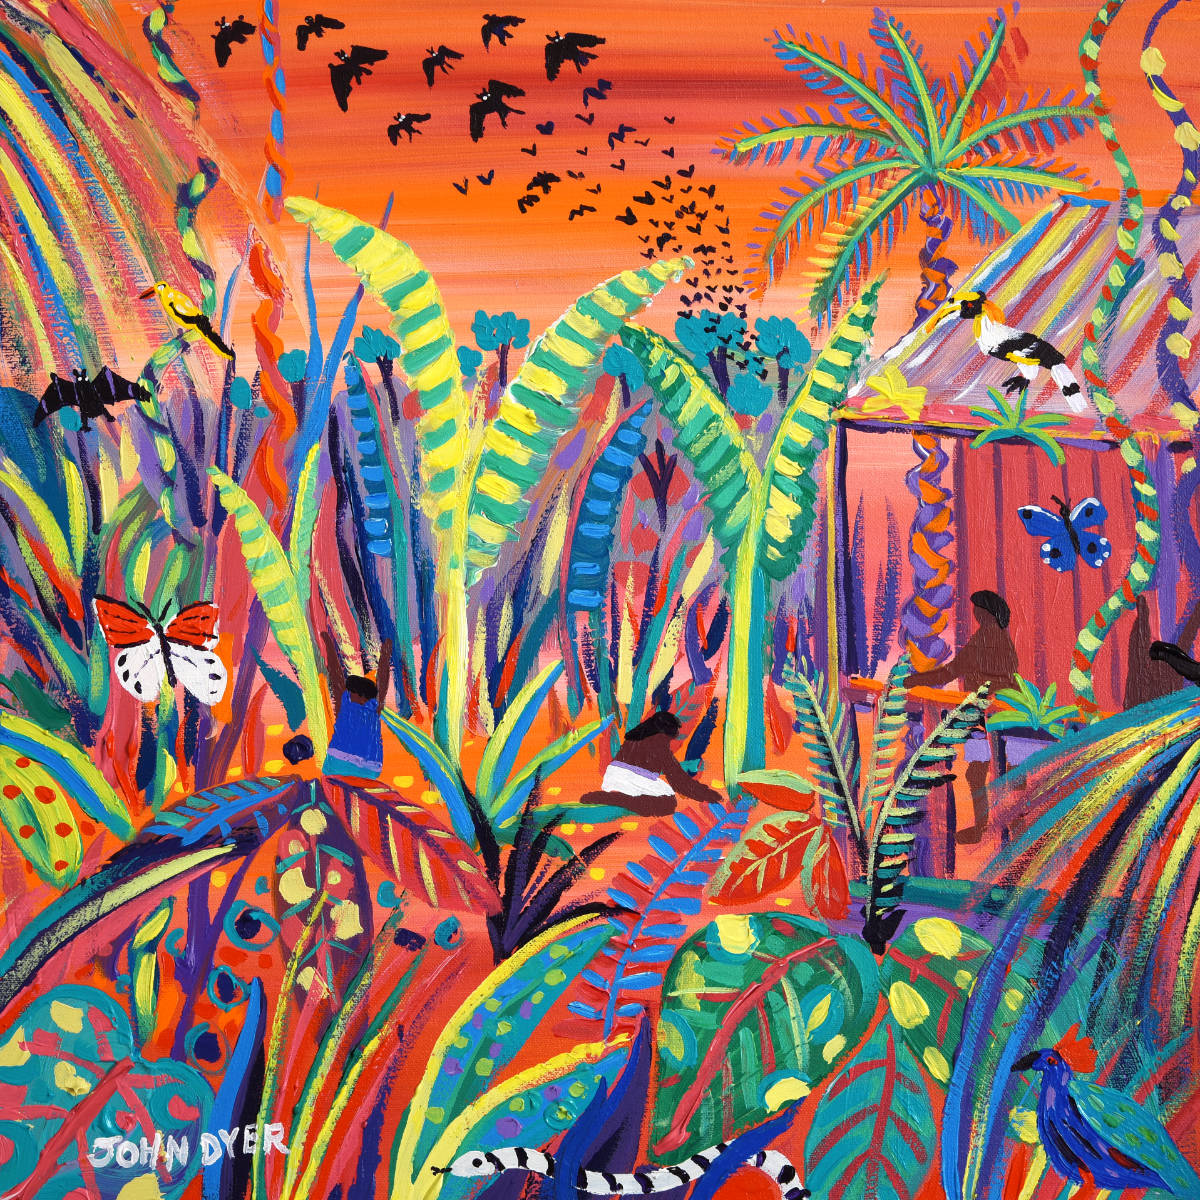 'Borneo Rainforest Sunset', 18x18 inches acrylic on canvas. Borneo Jungle Painting by Environmental Artist John Dyer. Cornwall Art Gallery